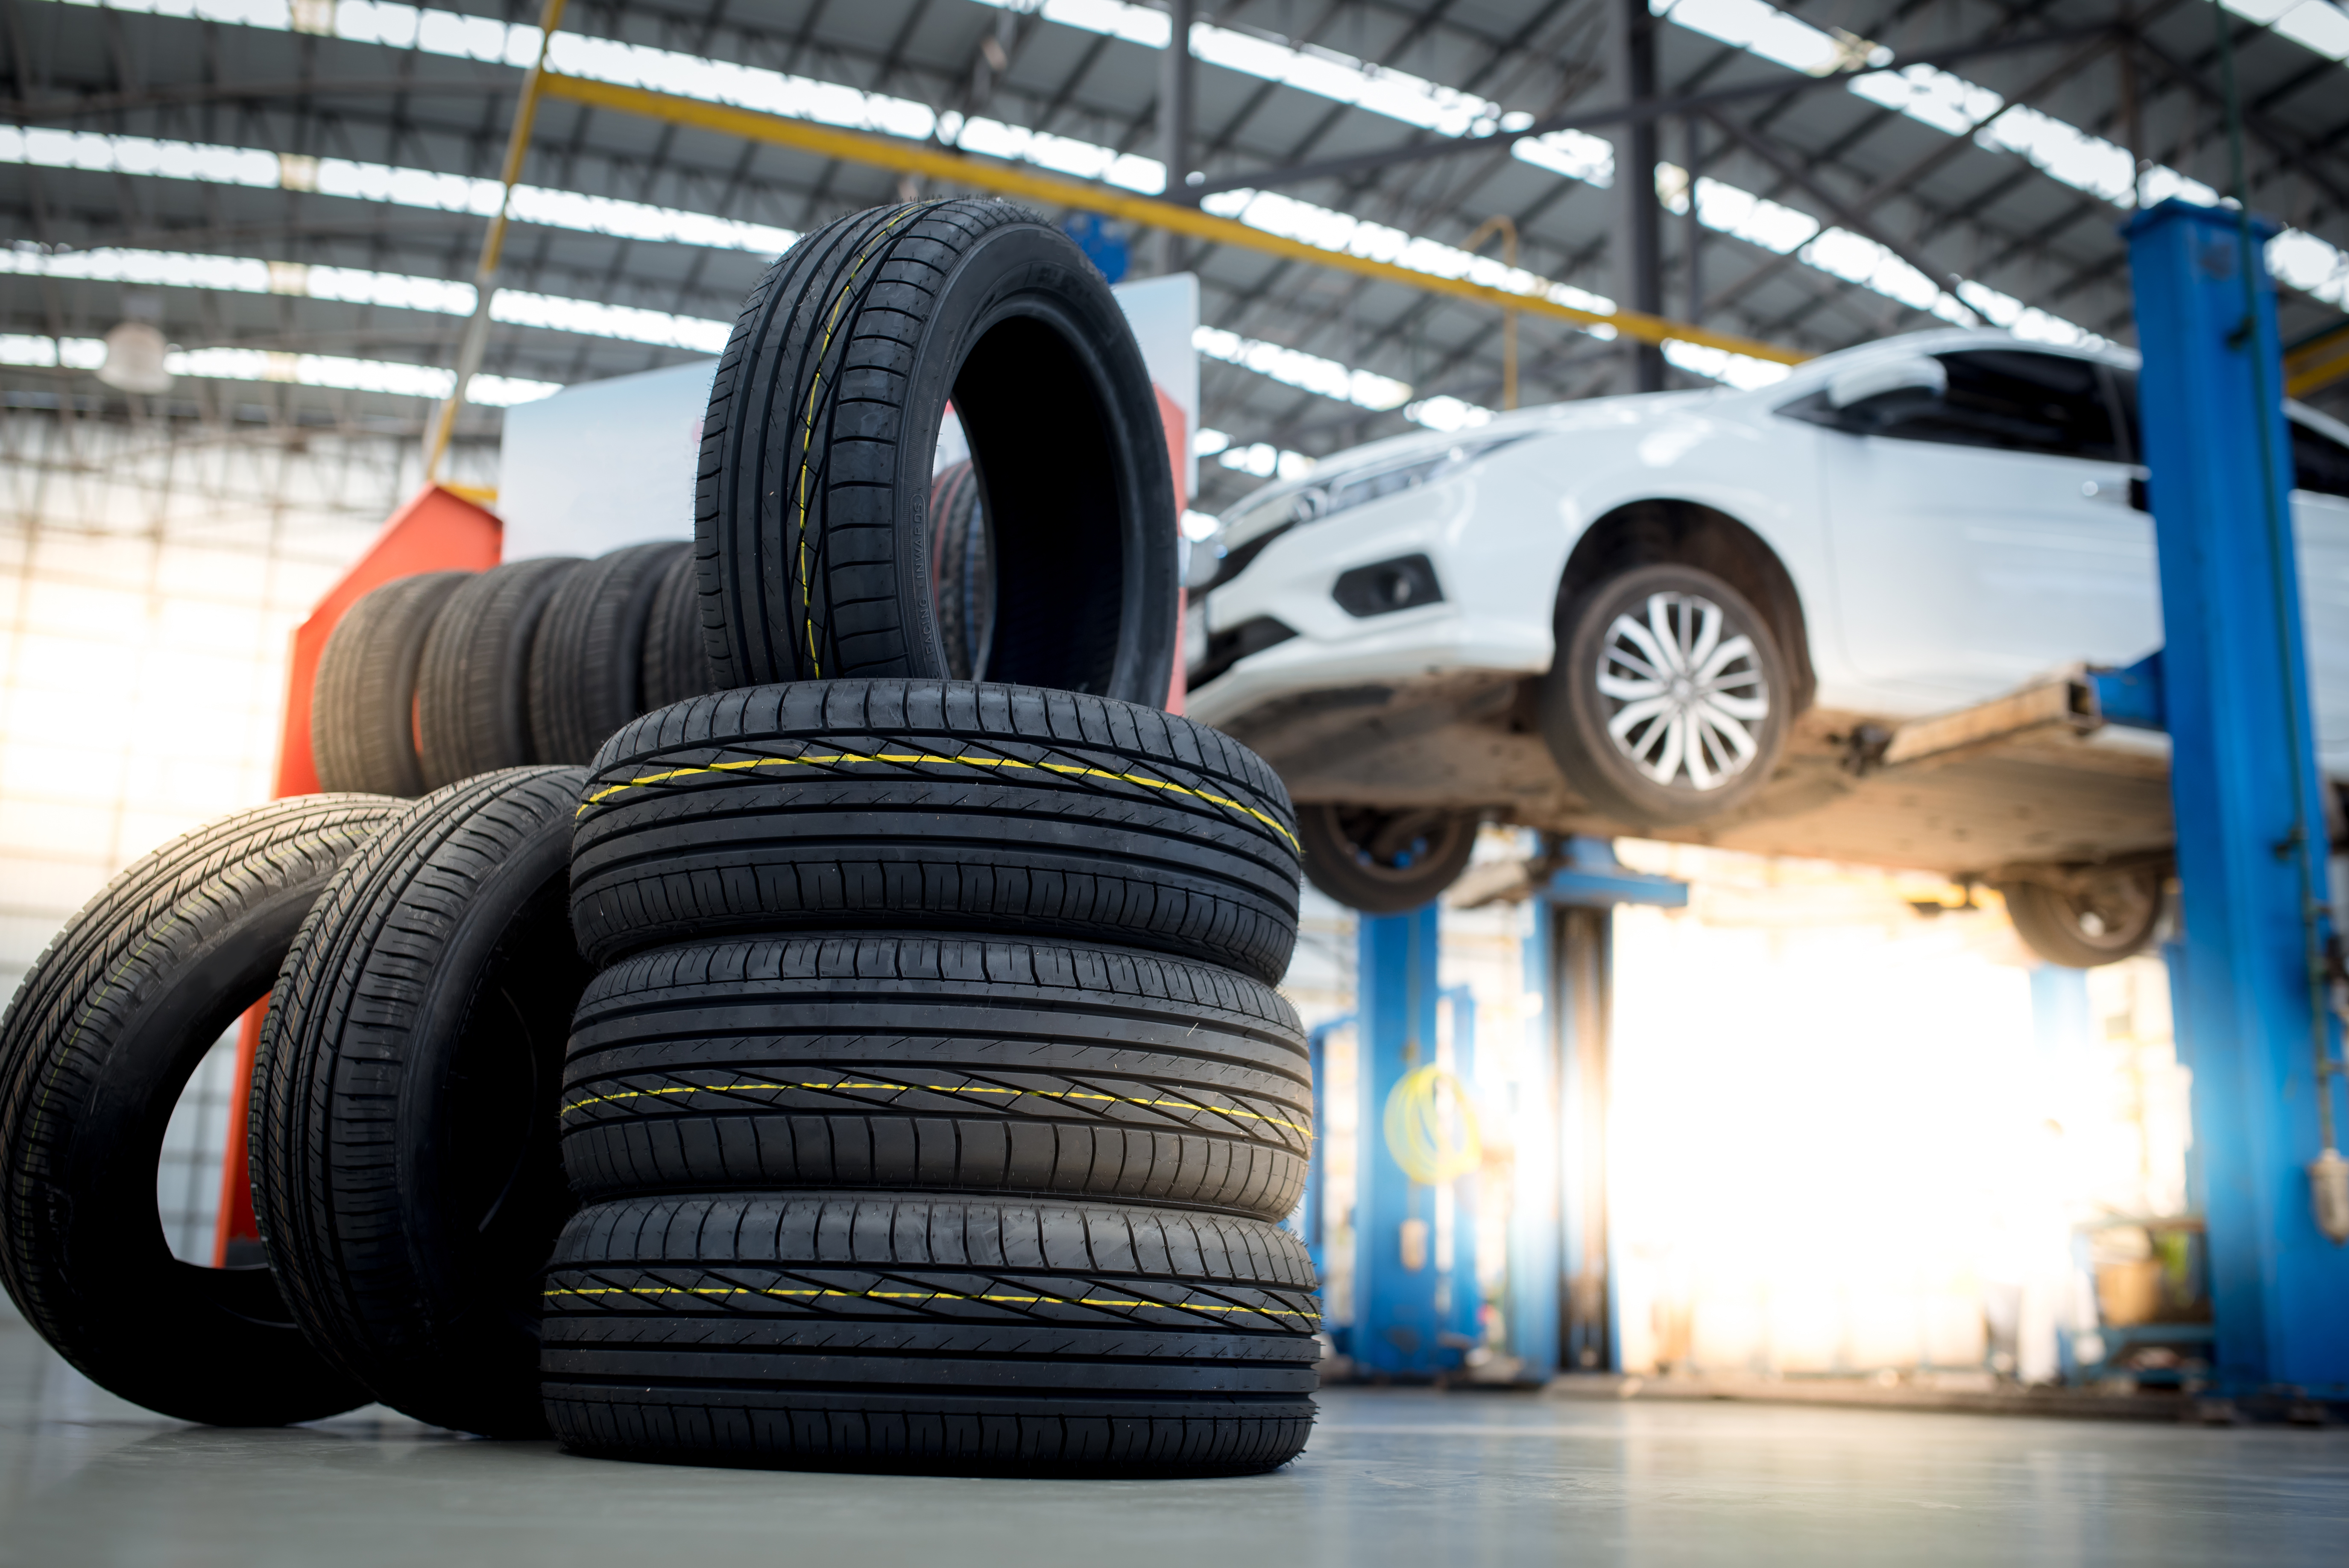 stack of tires pictured in front of a white car on a mechanic lif